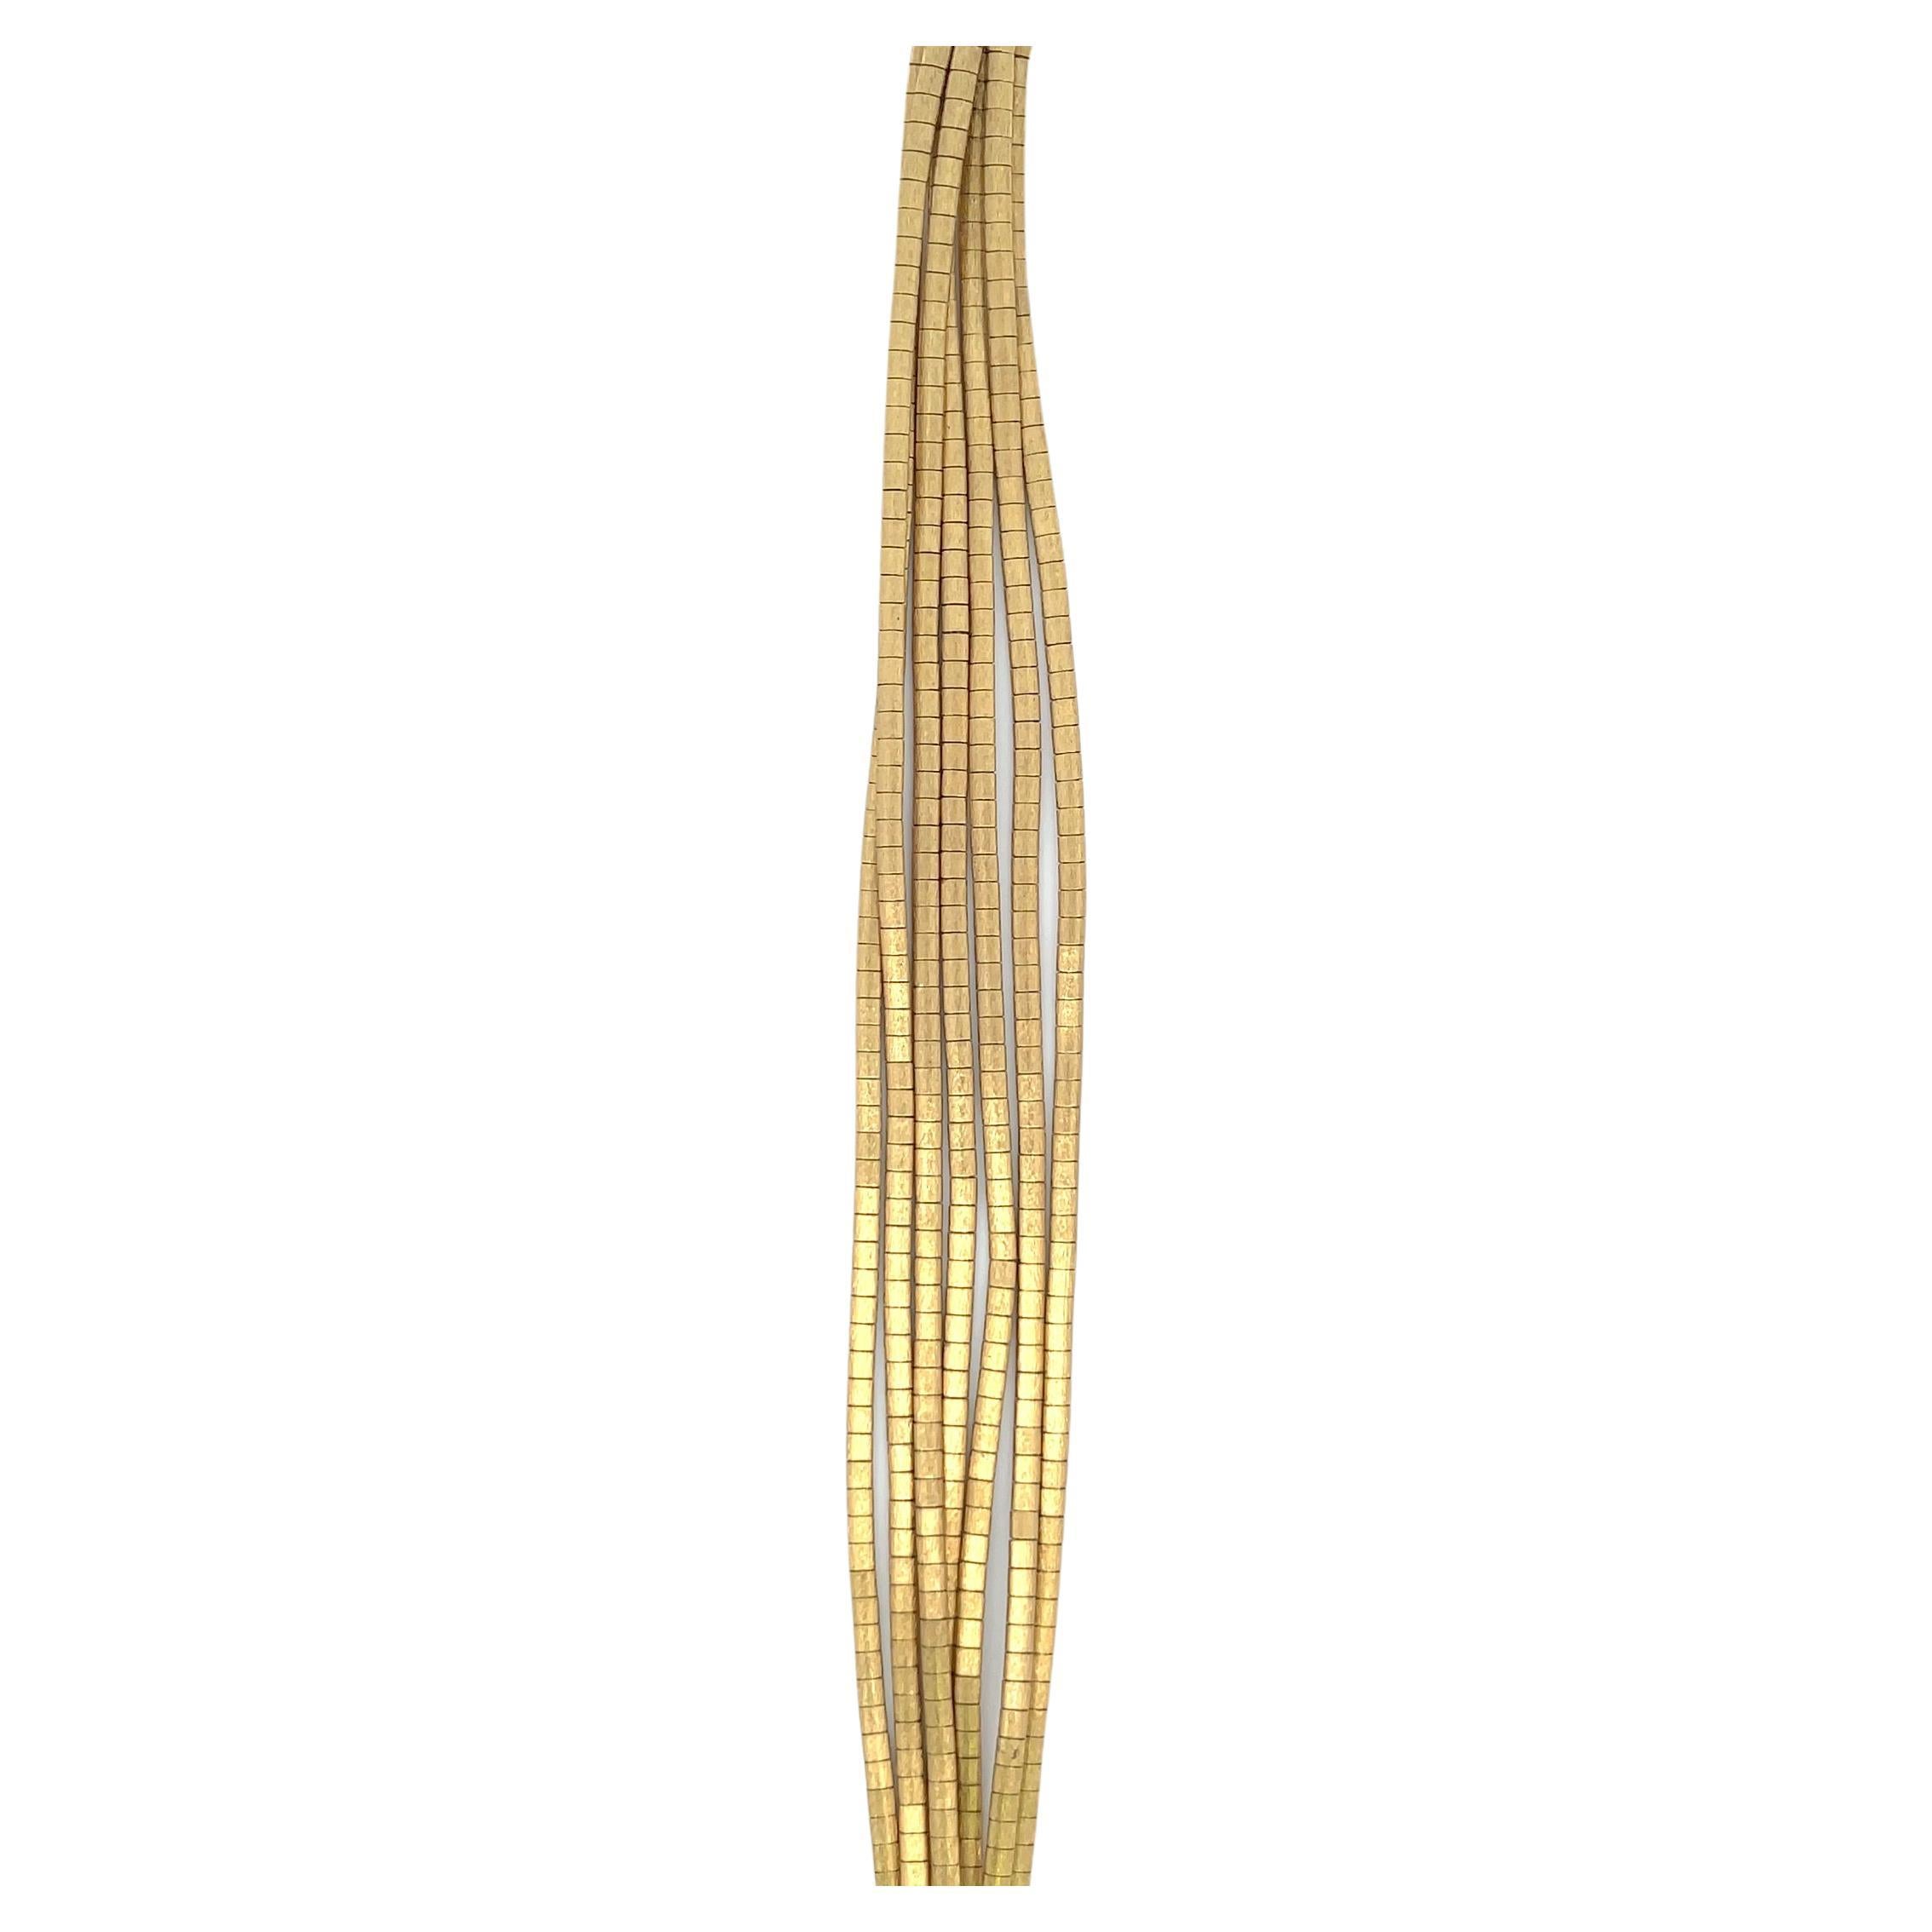 Made in Italy, this 18 karat yellow gold bracelet features 7 multi textured strands weighing 48.3 grams.
Each strand is 2.5 mm wide
Feels like silk! 

Search Harbor Diamonds for more gold link bracelets.
